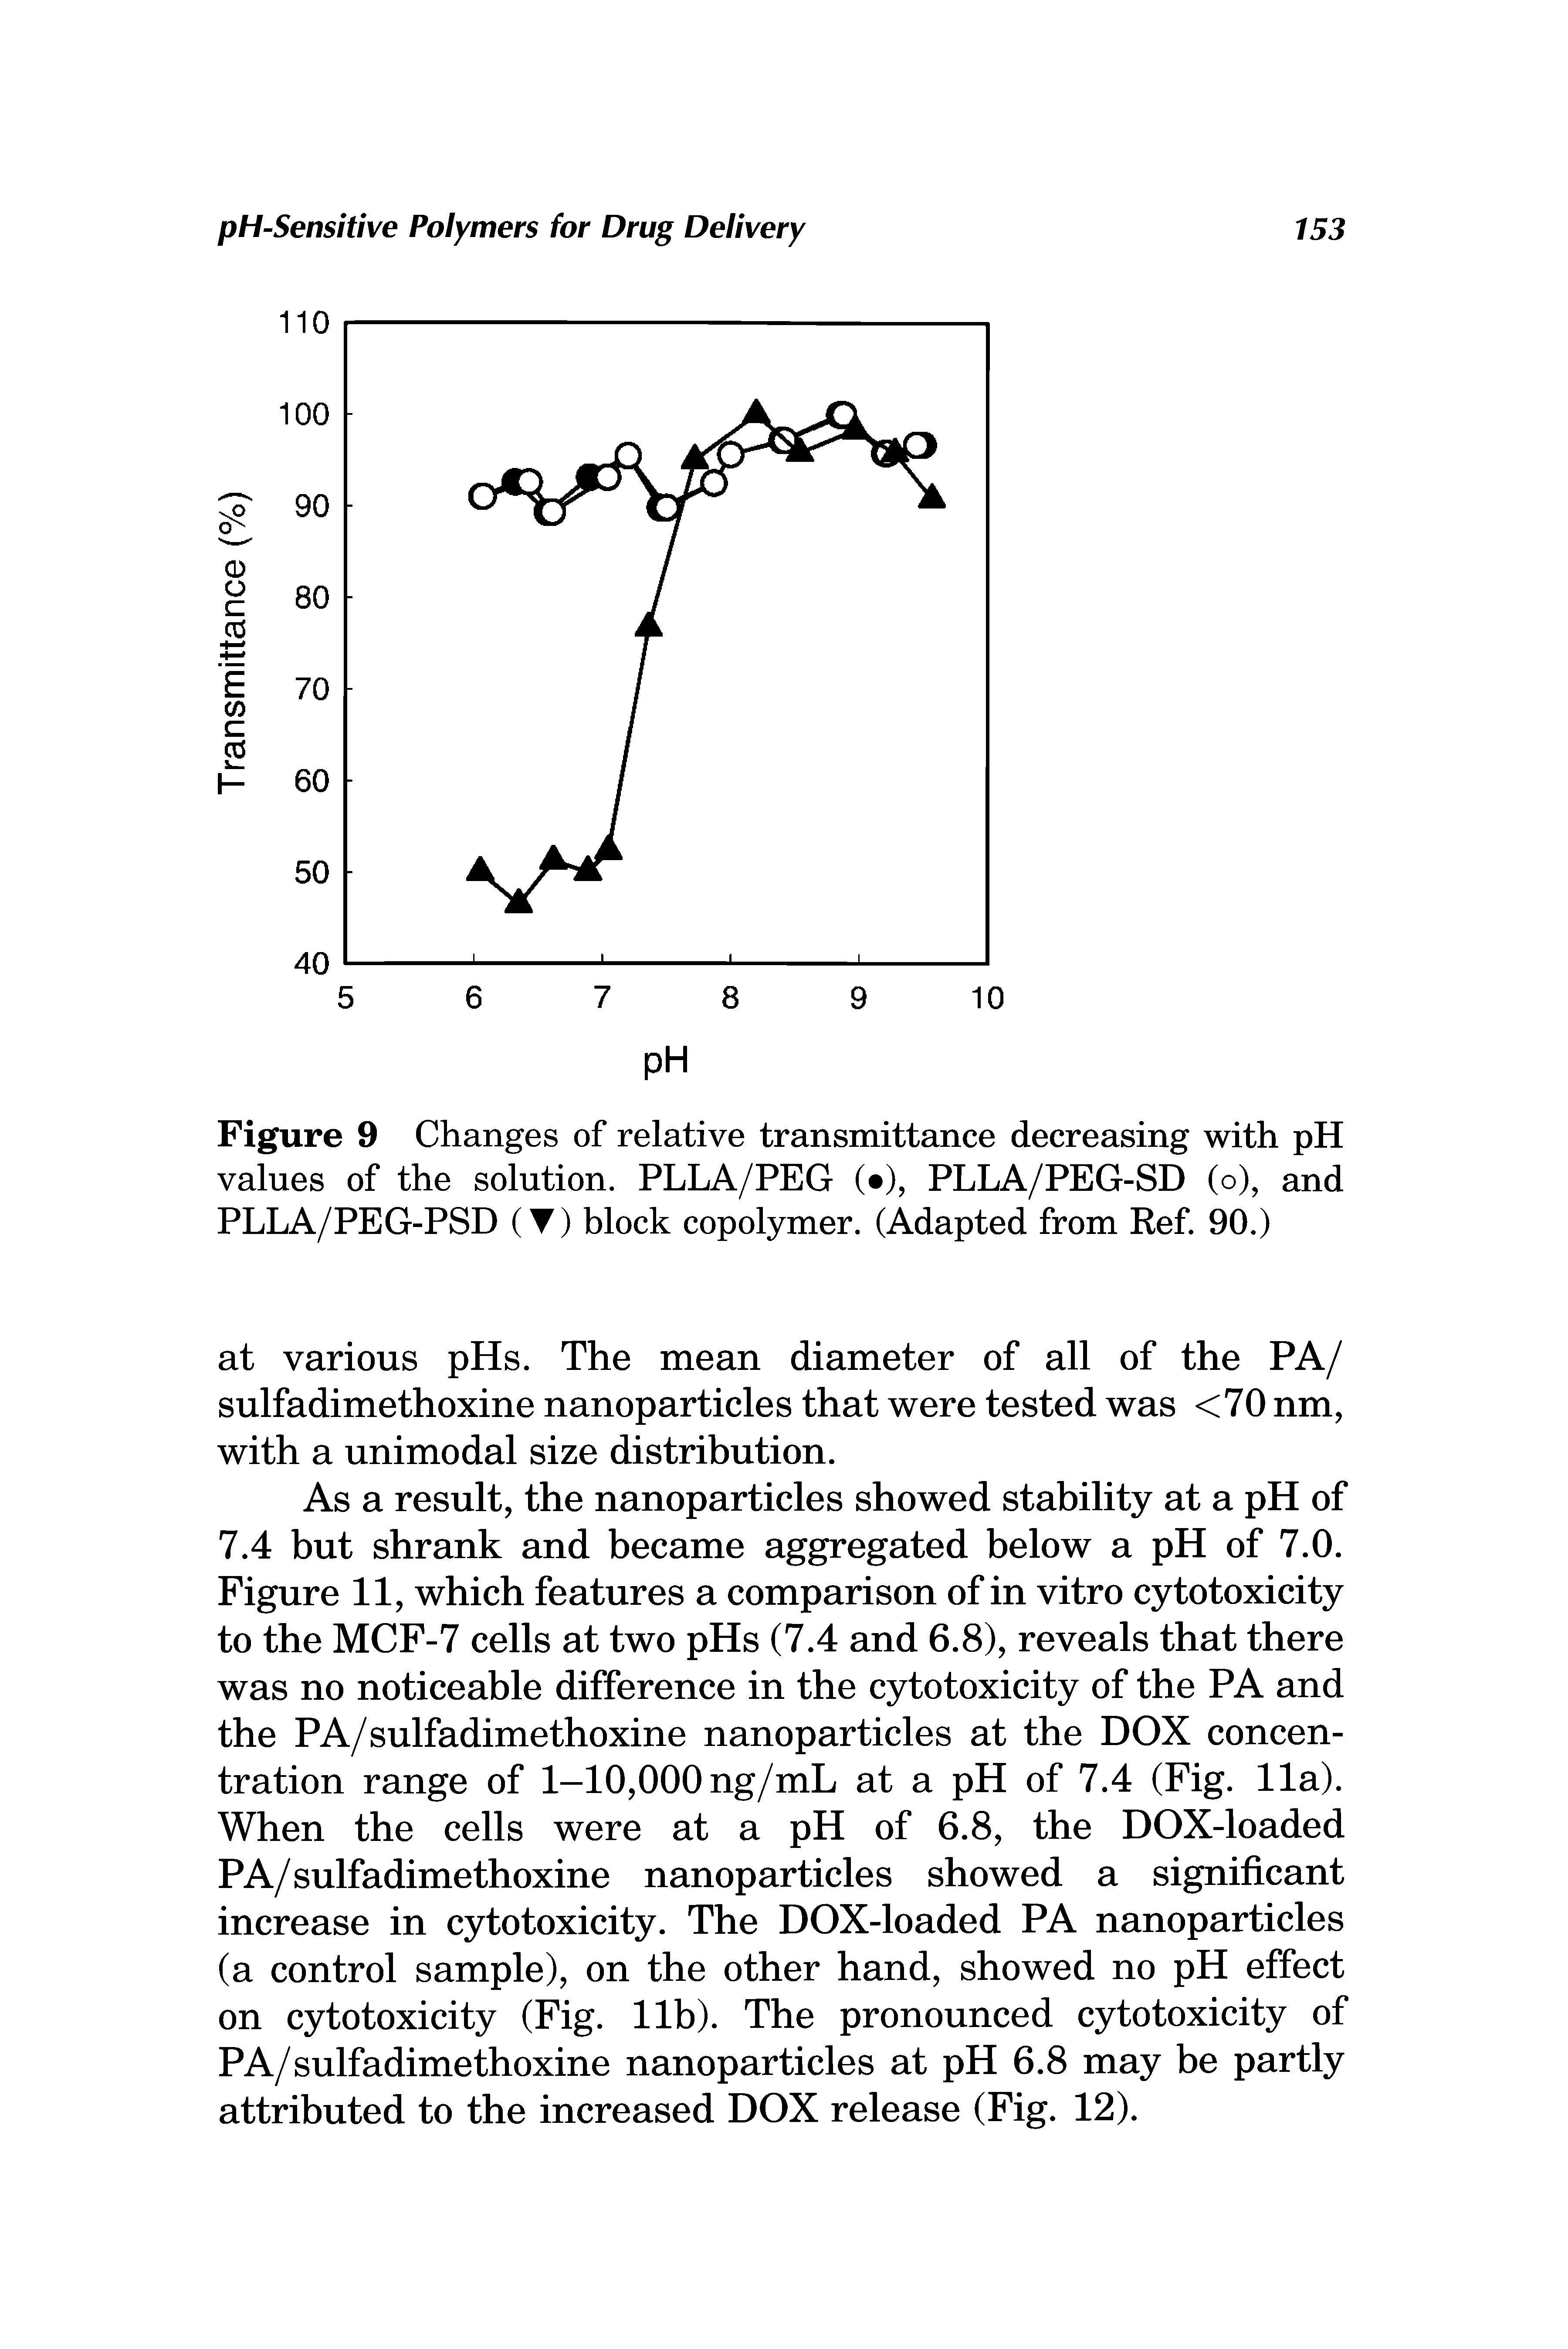 Figure 9 Changes of relative transmittance decreasing with pH values of the solution. PLLA/PEG ( ), PLLA/PEG-SD (o), and PLLA/PEG-PSD (T) block copolymer. (Adapted from Ref. 90.)...